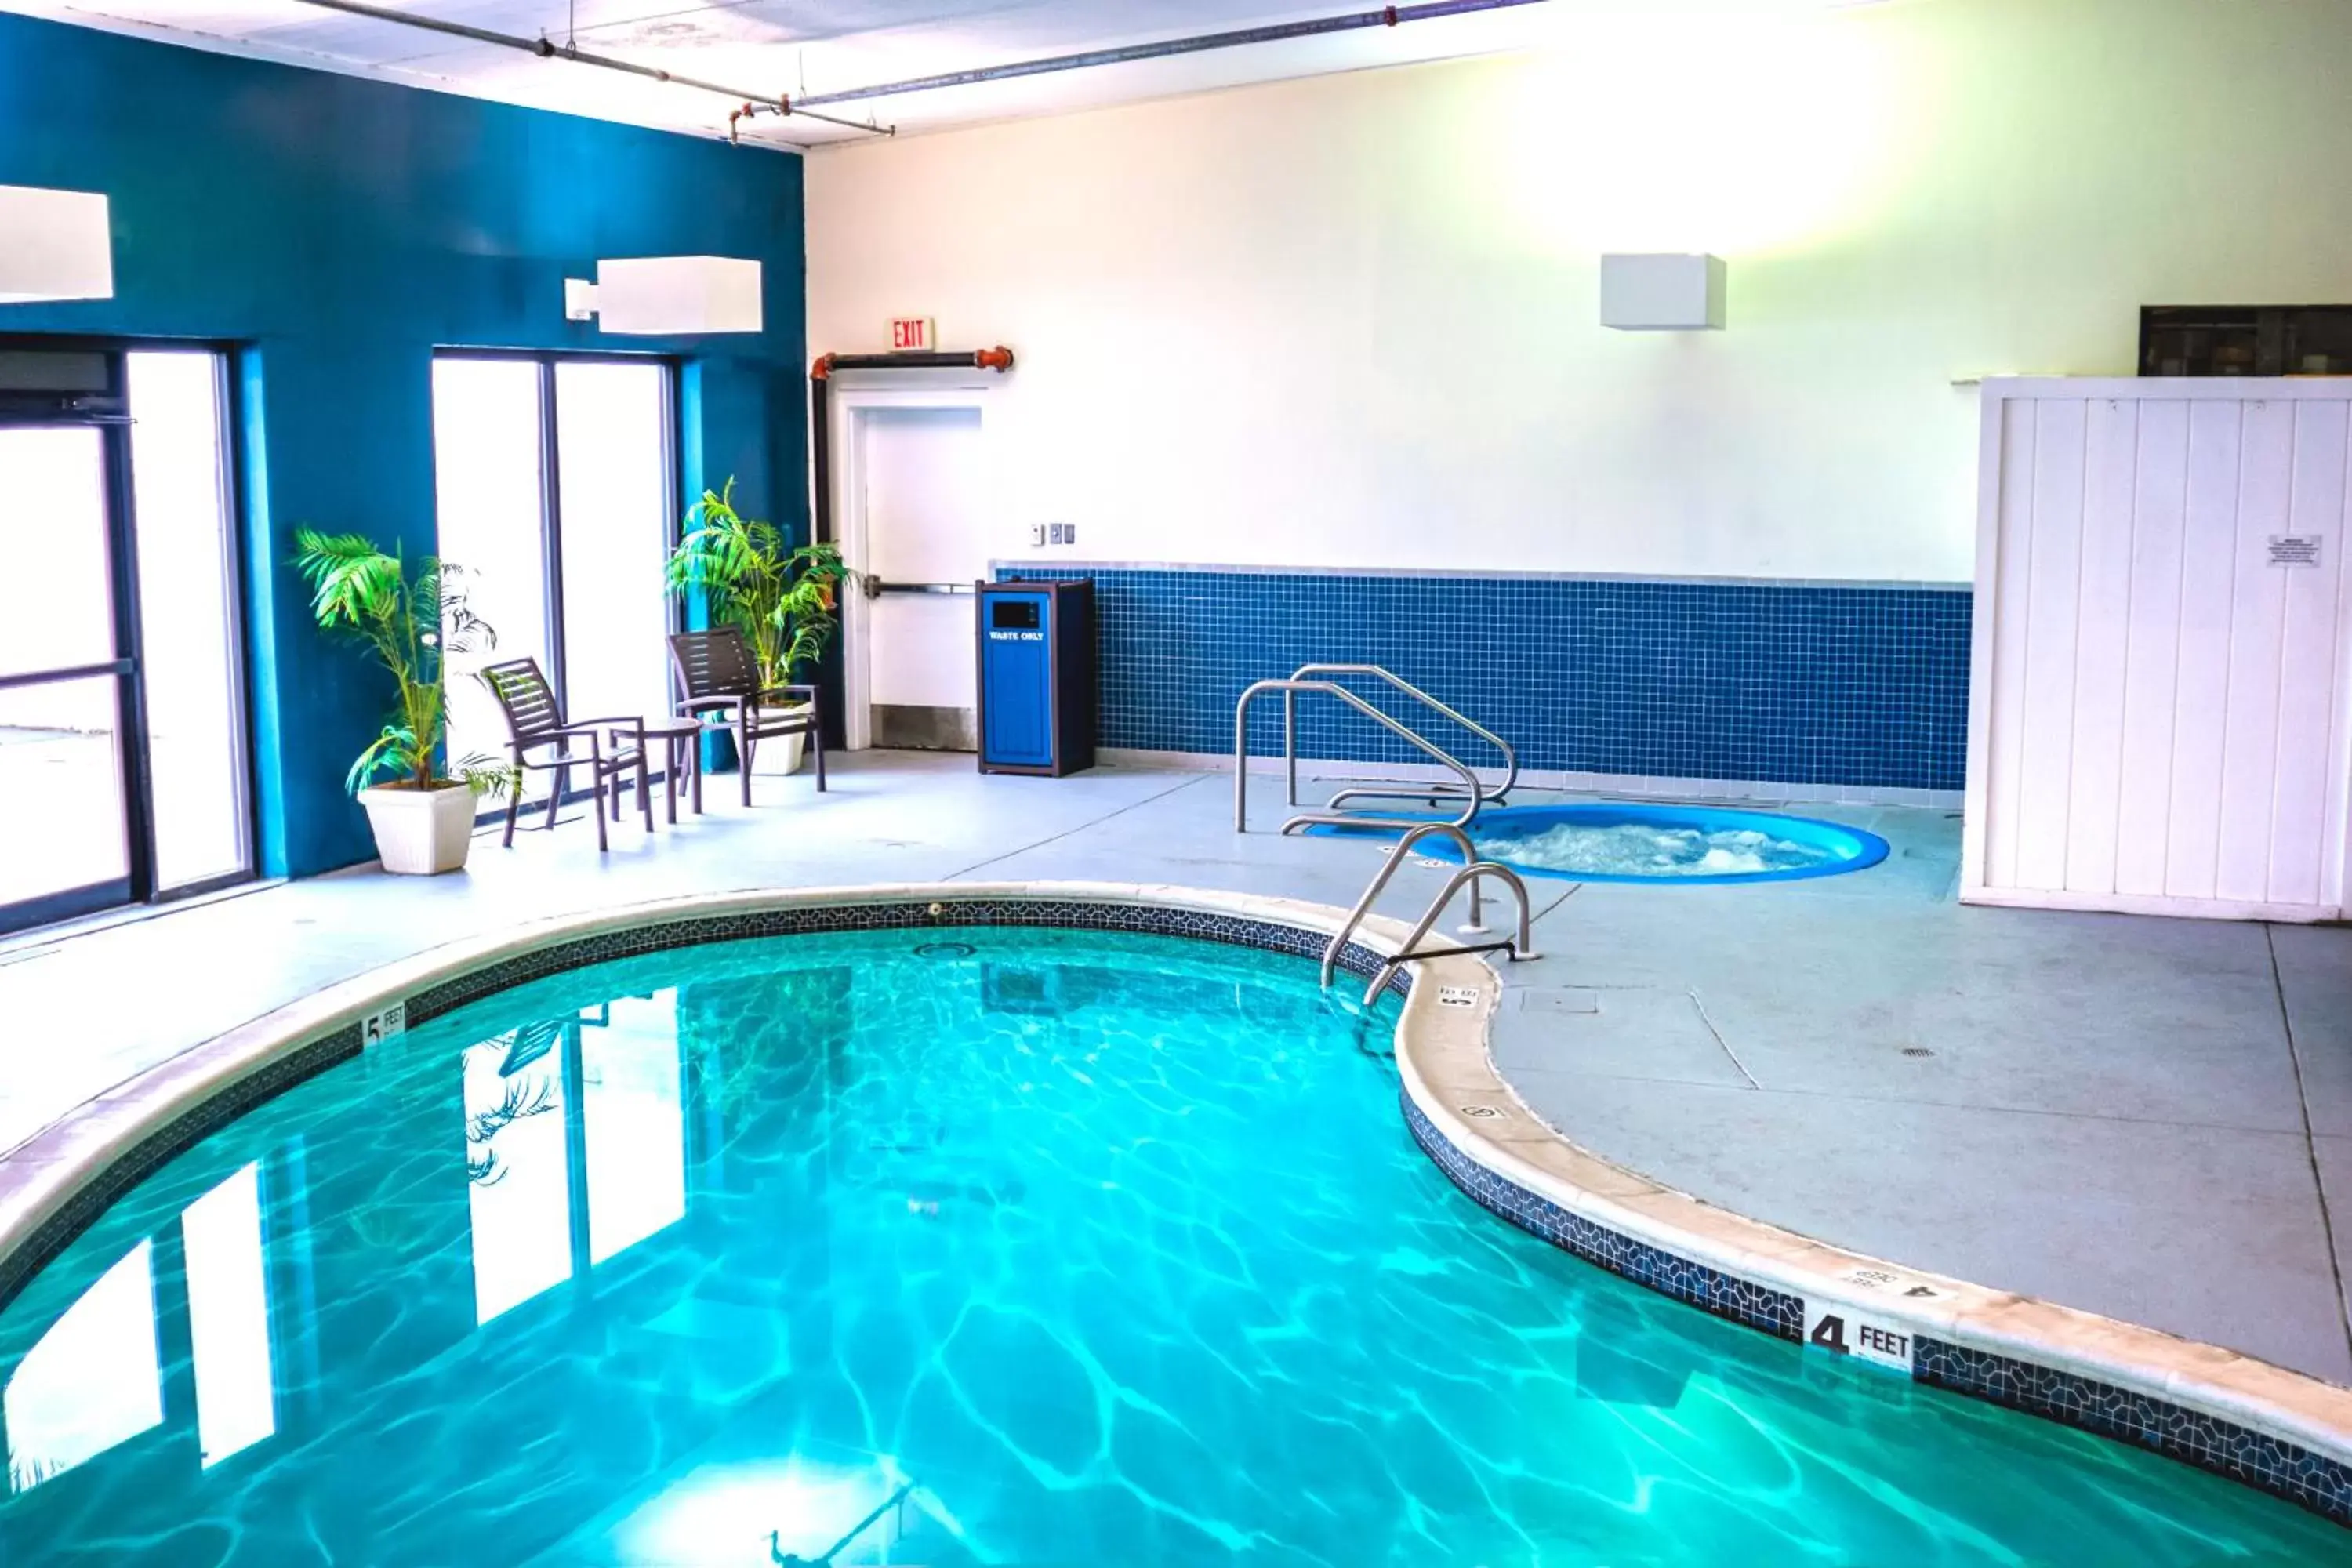 Swimming Pool in Fort William Henry Hotel